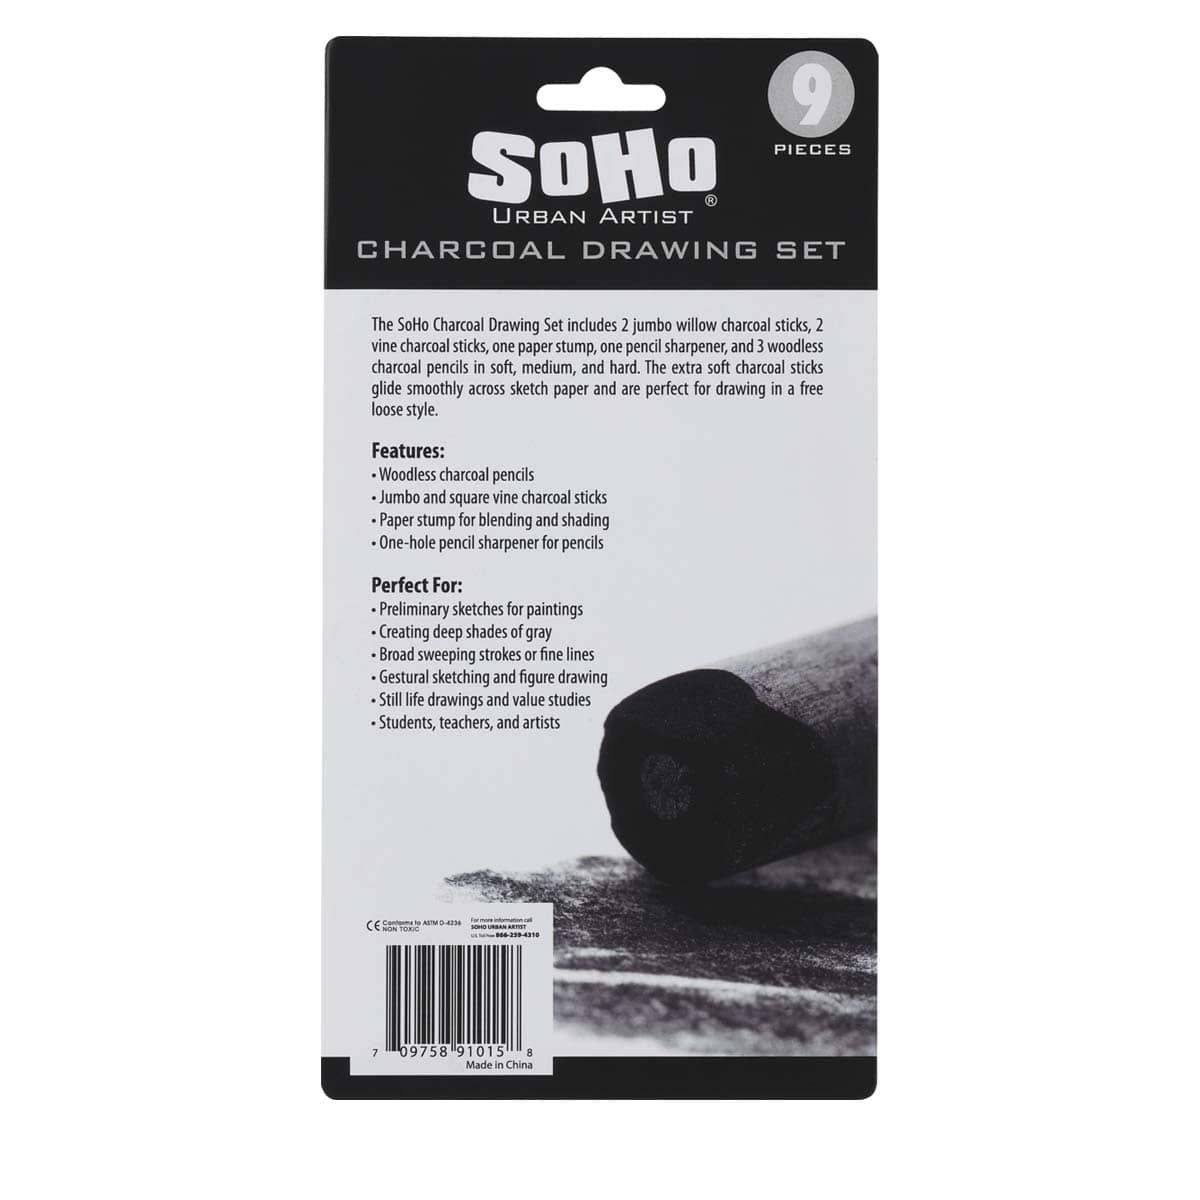 SoHo Urban Artist Charcoal Drawing Set - Drawing Charcoal for Artists,  Students, Blending, Live Figure Drawing, & More! - [Black - Drawing Set] 